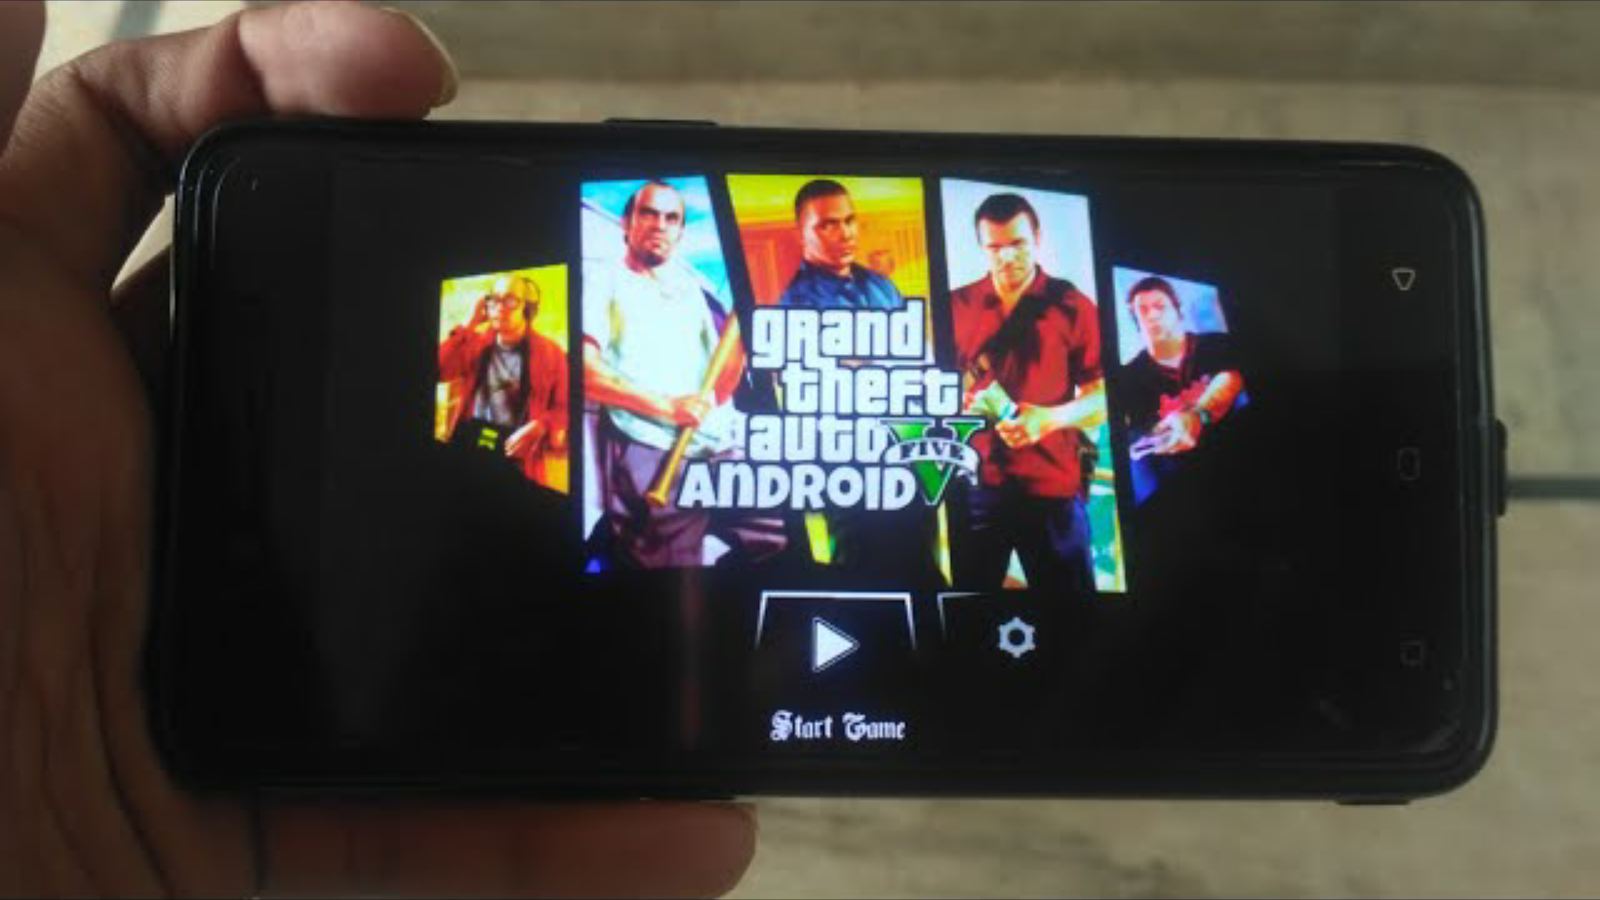 gta 5 download for android free full version